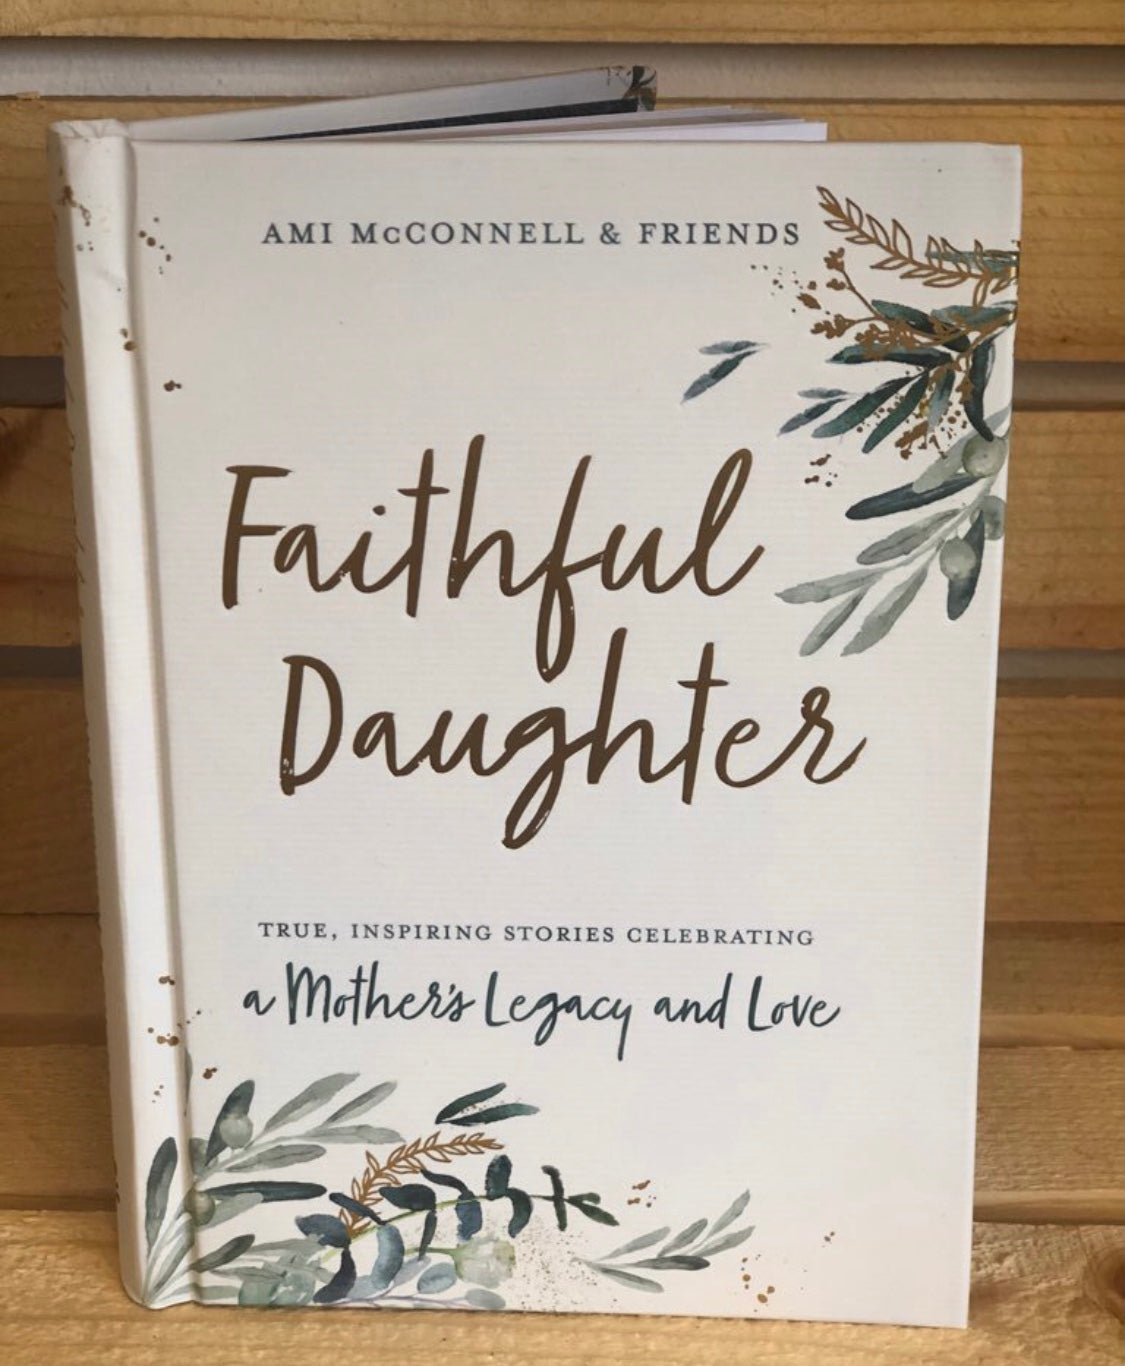 Faithful Daughter by Ami McConnell & Friends